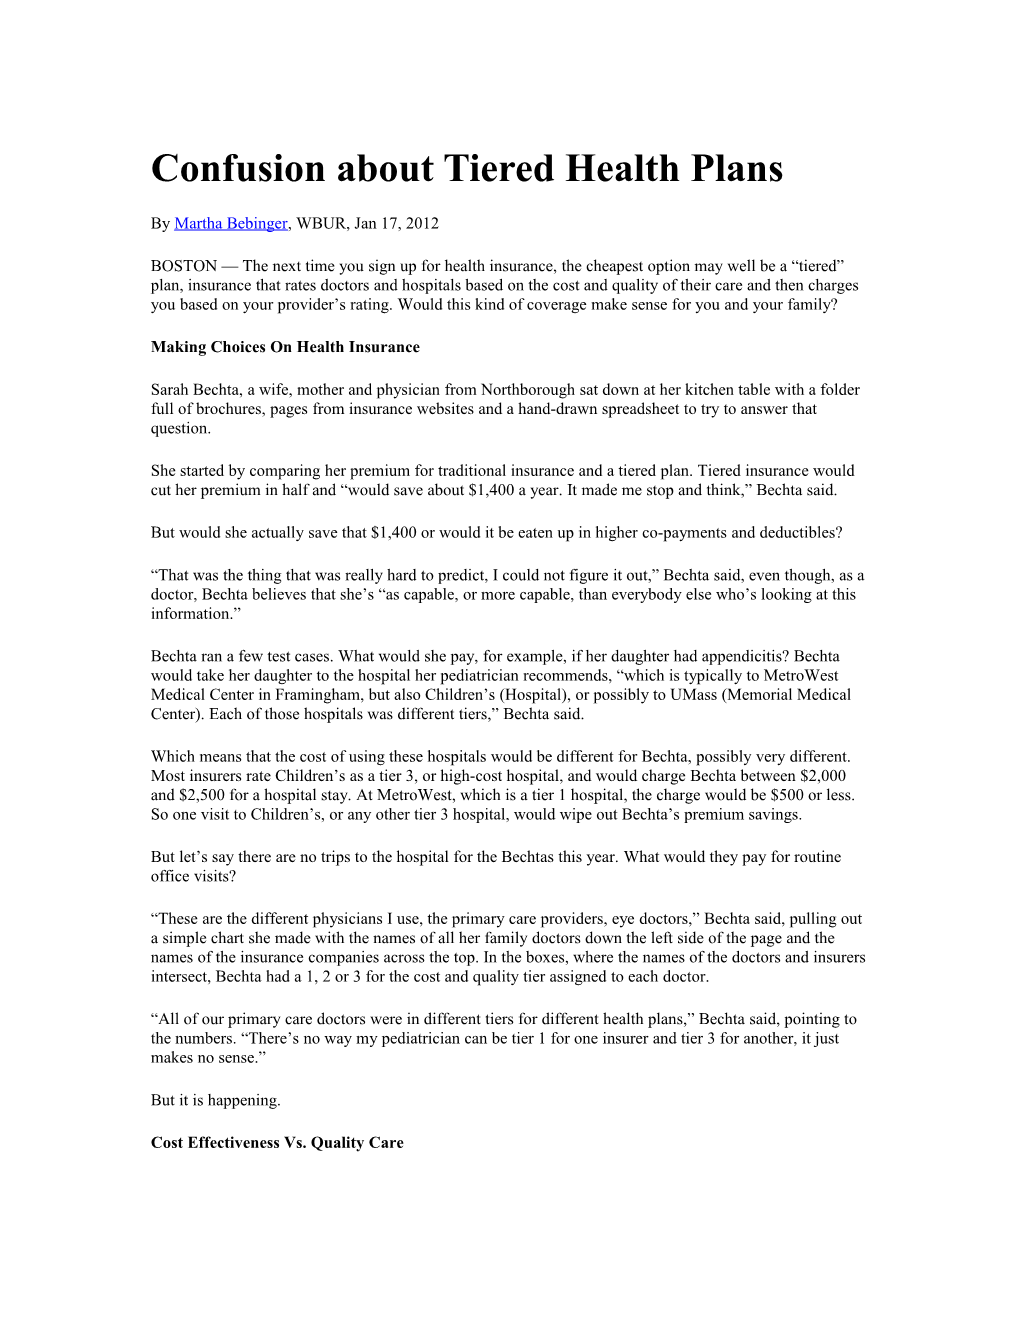 Confusion About Tiered Health Plans